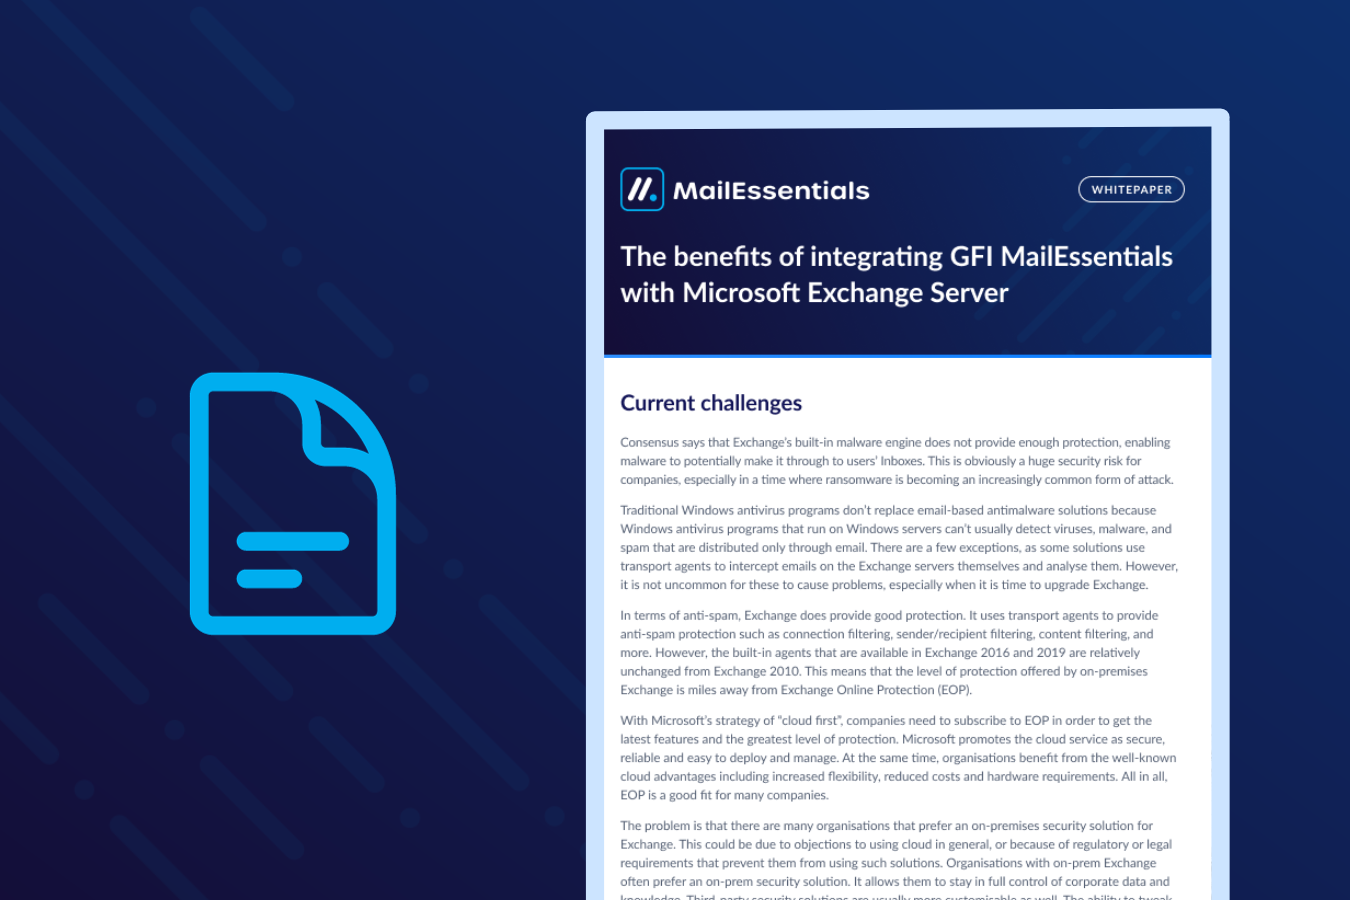 The benefits of integrating MailEssentials with Microsoft Exchange Server